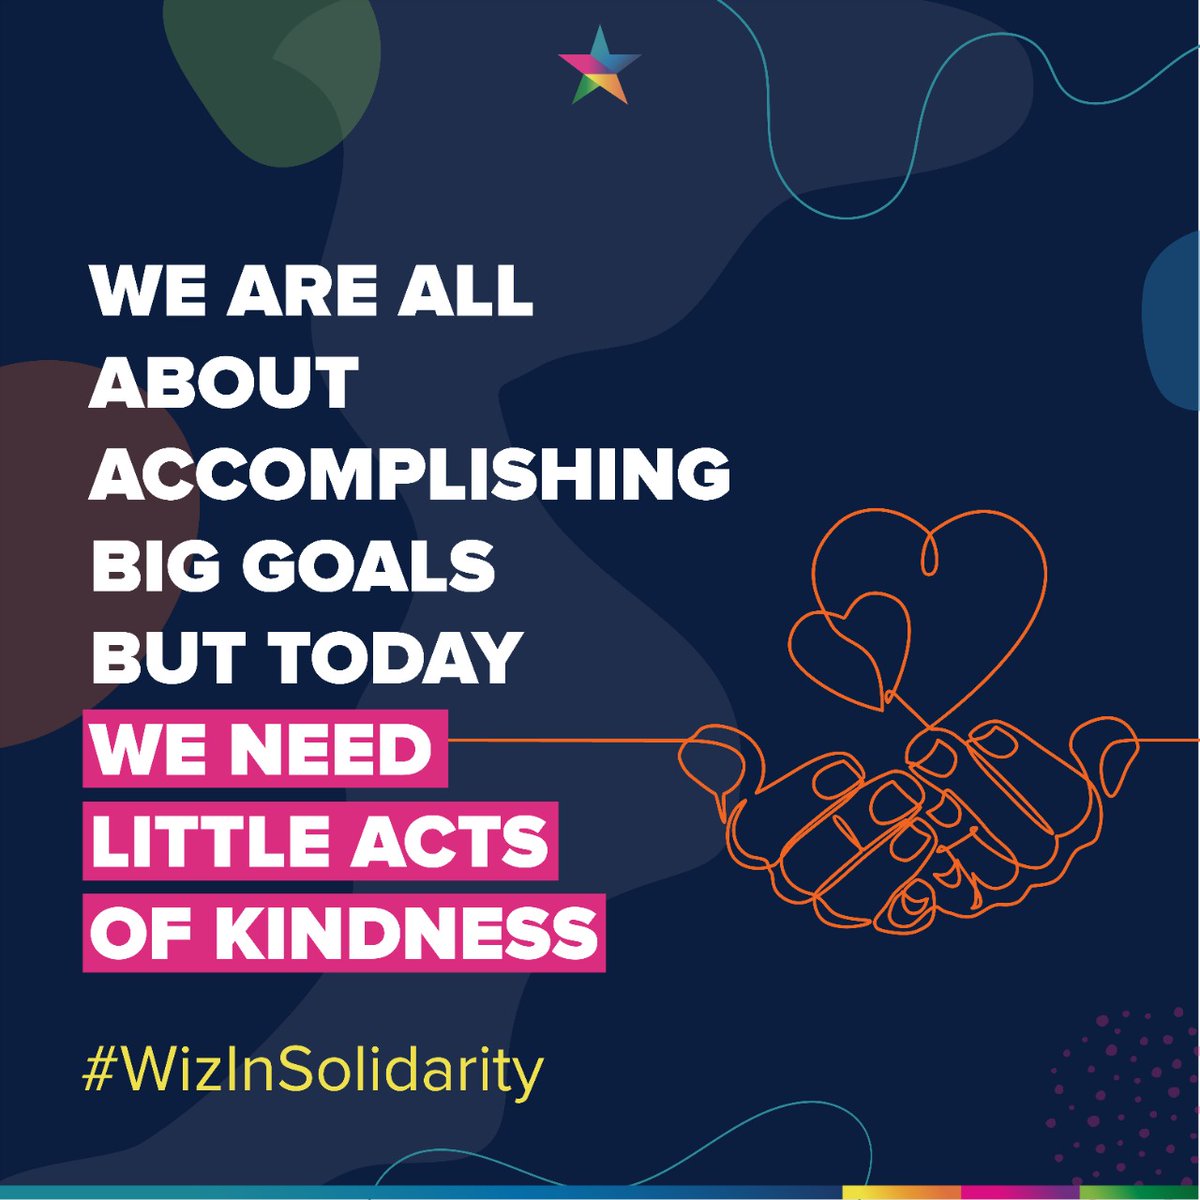 Let's purchase some extra essentials for that neighbour, amplify a stranger's request for help or just video call a friend who is feeling low. #whatweneed is love and humanity to shine through! #Wizcraft #IndiaFightsCorona #InThisTogether